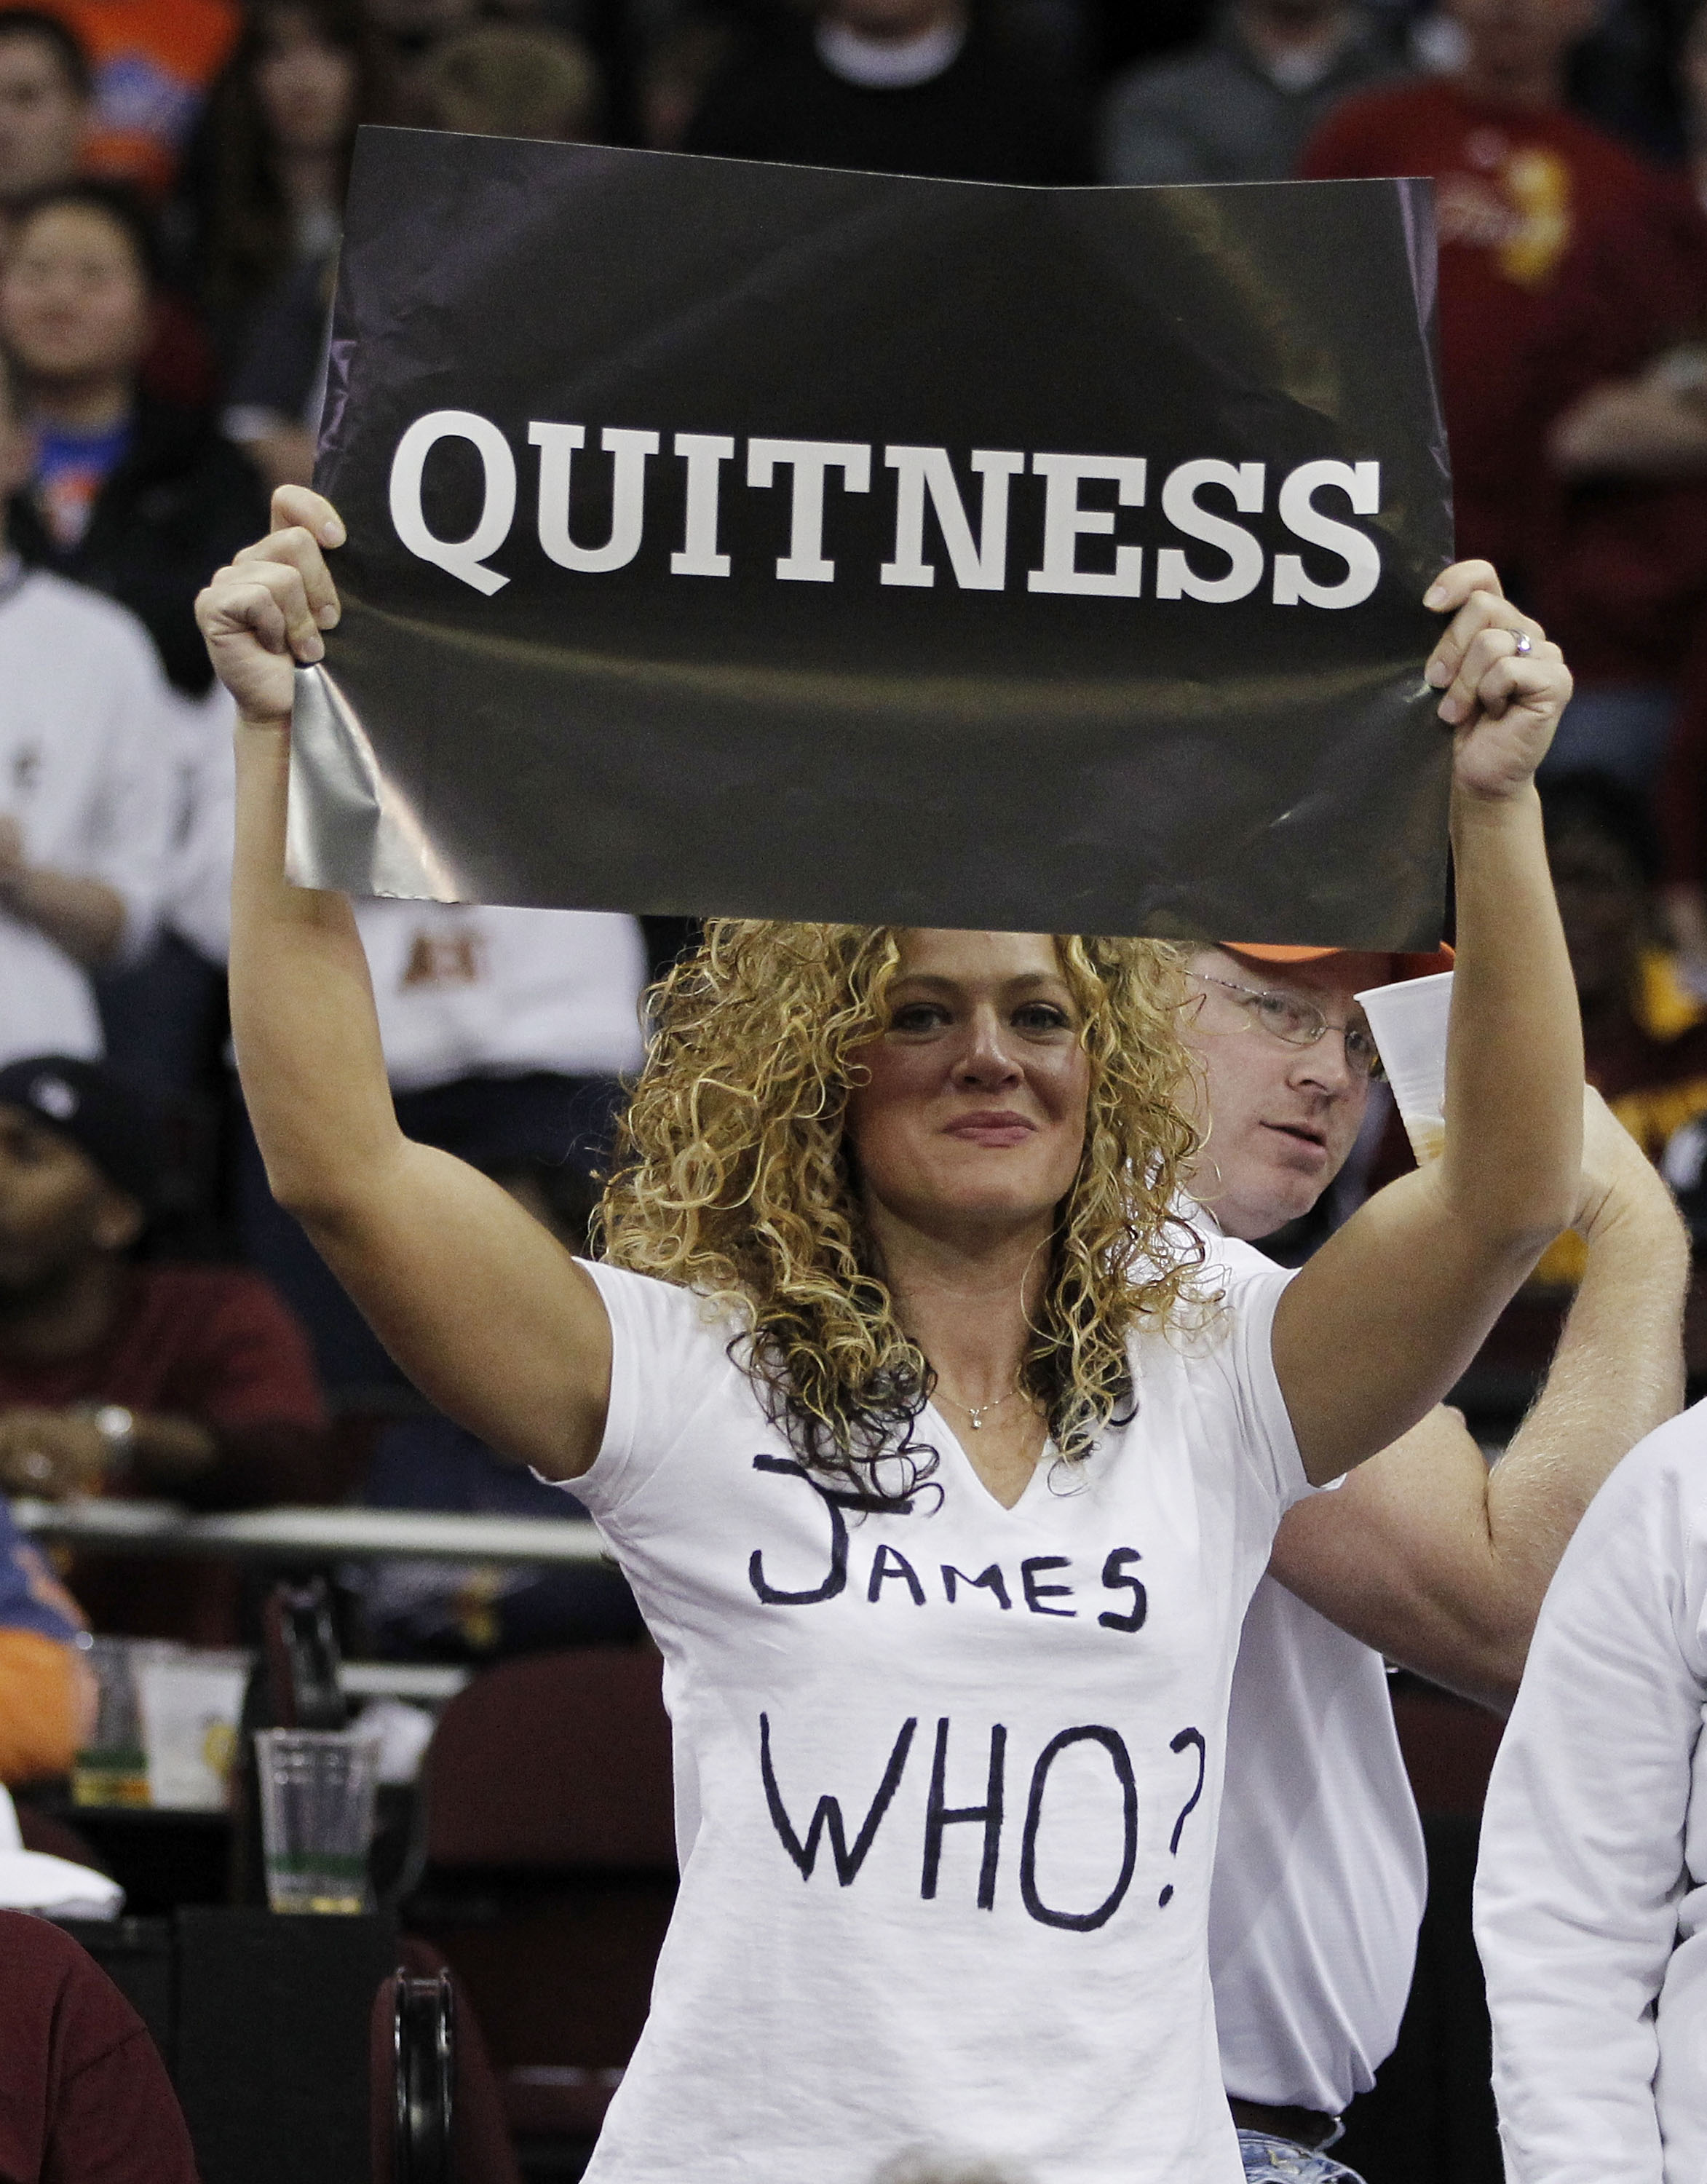 CLEVELAND, OH - DECEMBER 02: A Fan holds up sign during a game between the Cleveland Cavaliers playing the Miami Heat and Cleveland Cavliers at Quicken Loans Arena on December 2, 2010 in Cleveland, Ohio. NOTE TO USER: User expressly acknowledges and agree